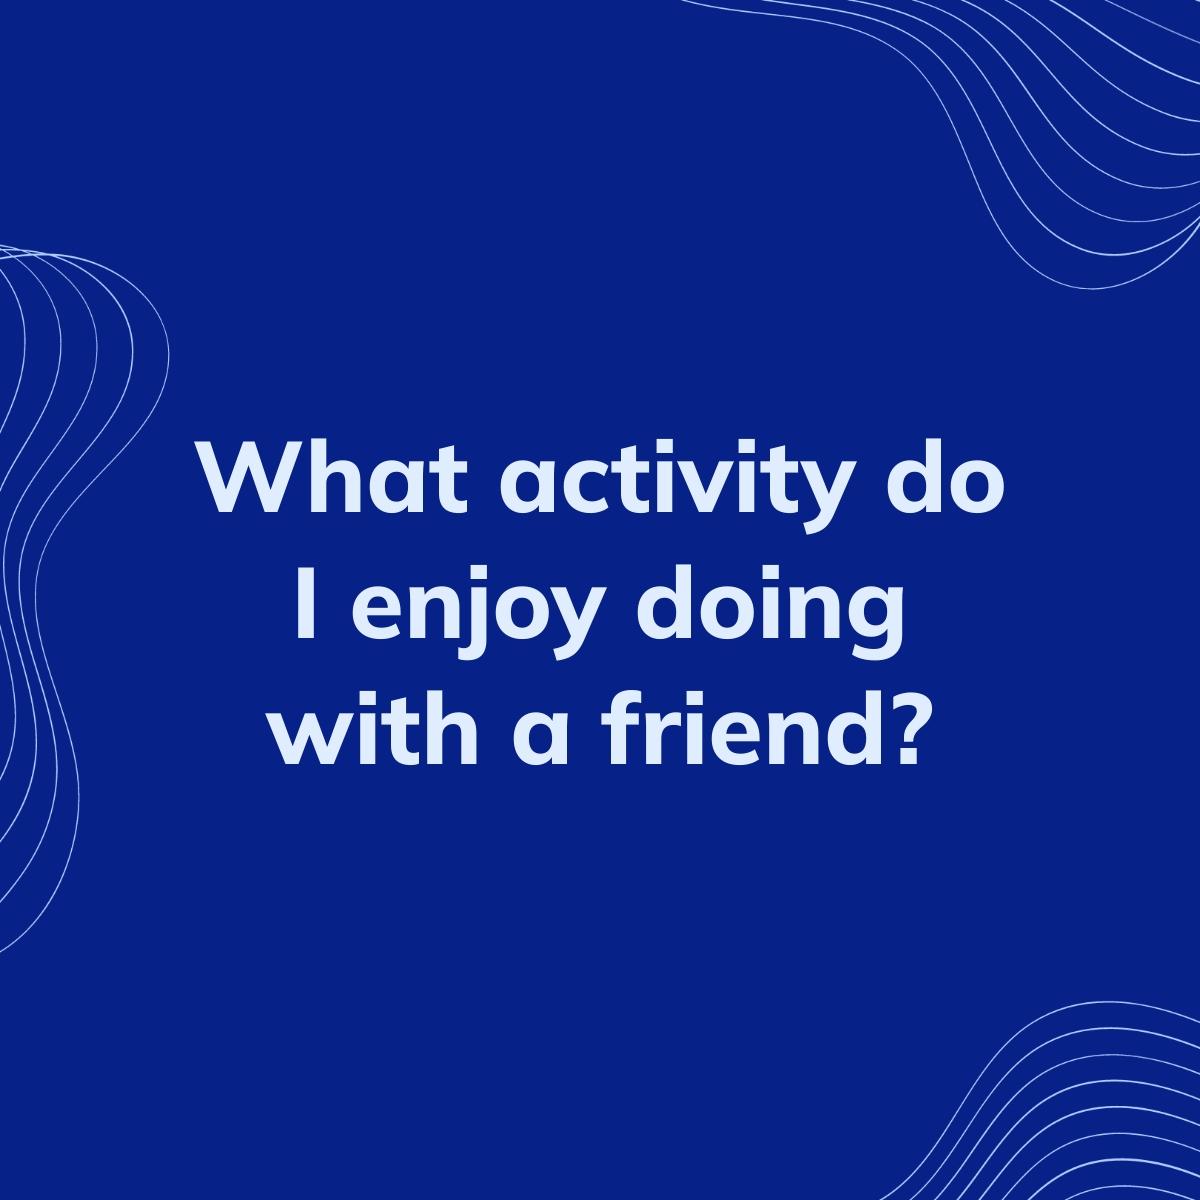 Journal Prompt: What activity do I enjoy doing with a friend?